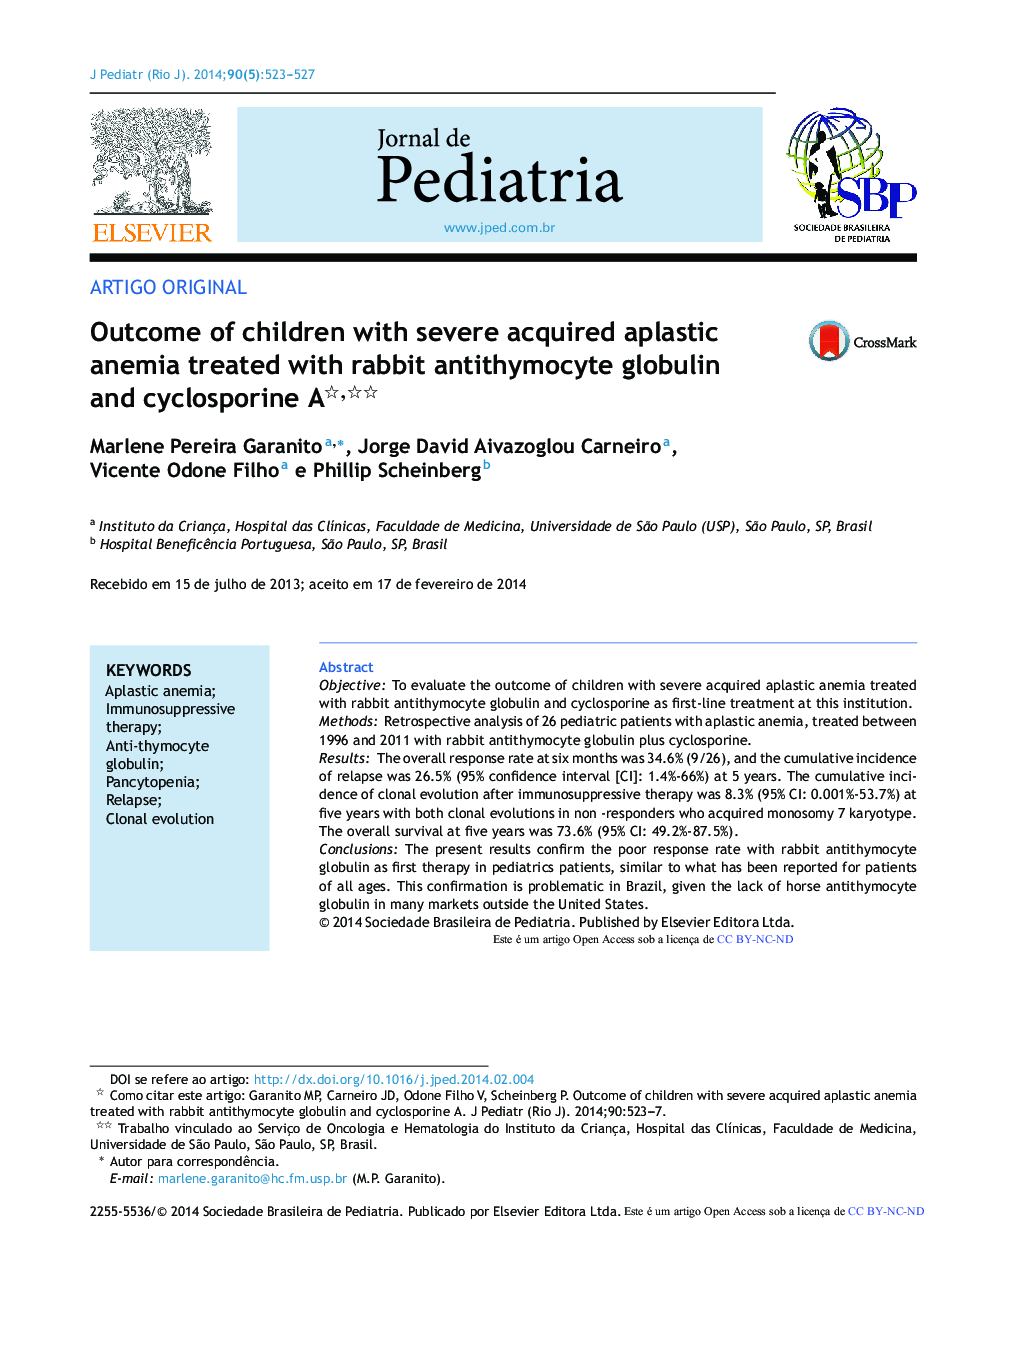 Outcome of children with severe acquired aplastic anemia treated with rabbit antithymocyte globulin and cyclosporine A 